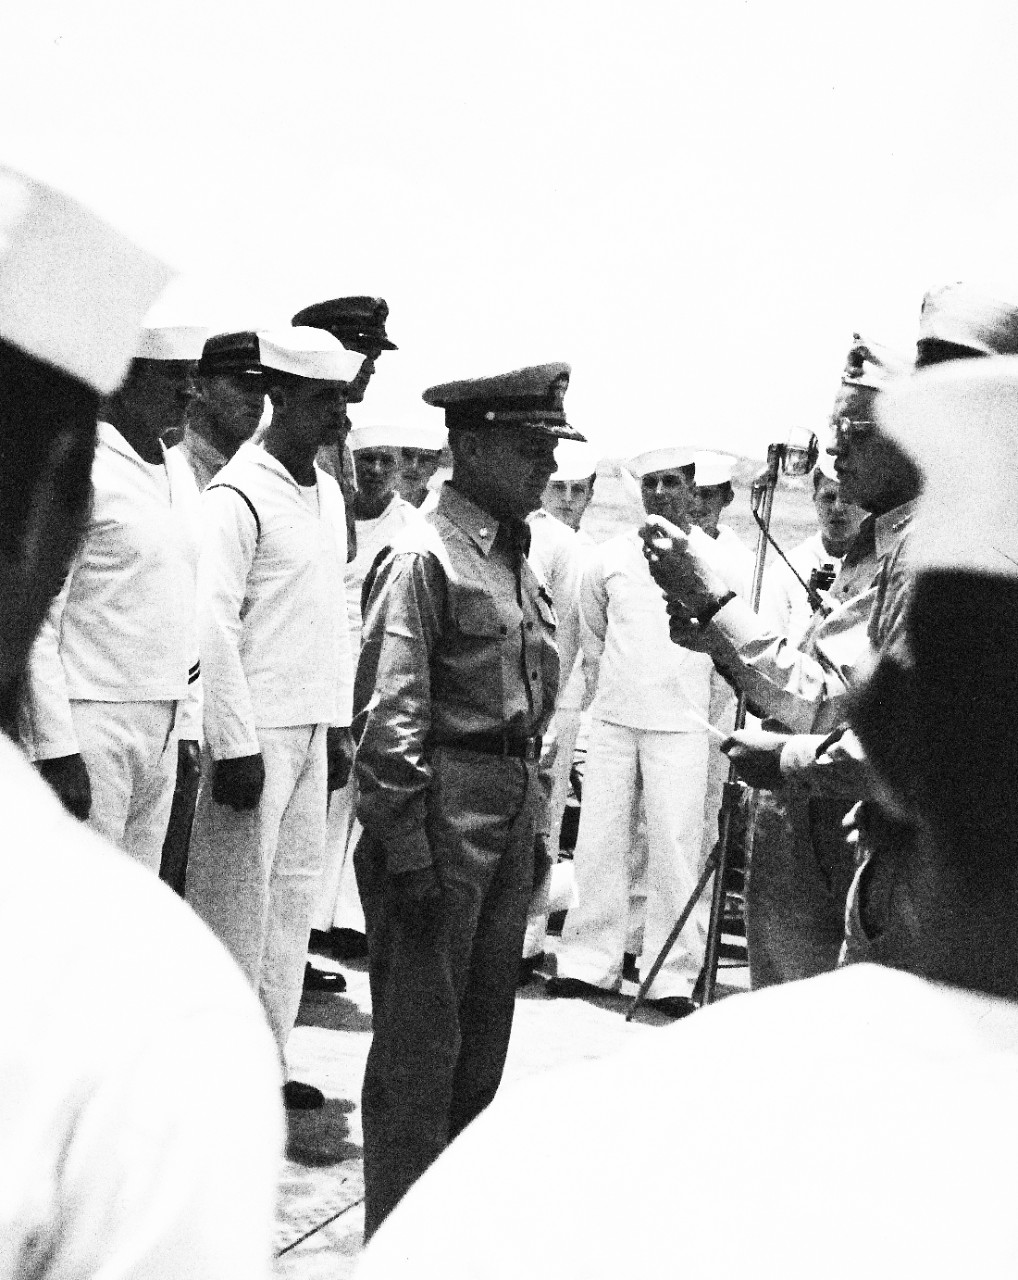 80-G-40170:    Commander Arnold E. True, USN.  Receives the Navy Cross and Distinguished Service Medal for his performance while in command of USS Hammann (DD-412) during the May-June 1942 Battles of Coral Sea and Midway. Hammann was lost on 6 June 1942, during the Midway action.  Presenting the awards is Admiral William F. Halsey. Photograph was taken circa October 1942.   Official U.S. Navy Photograph, now in the collections of the National Archives.  (2015/10/20).